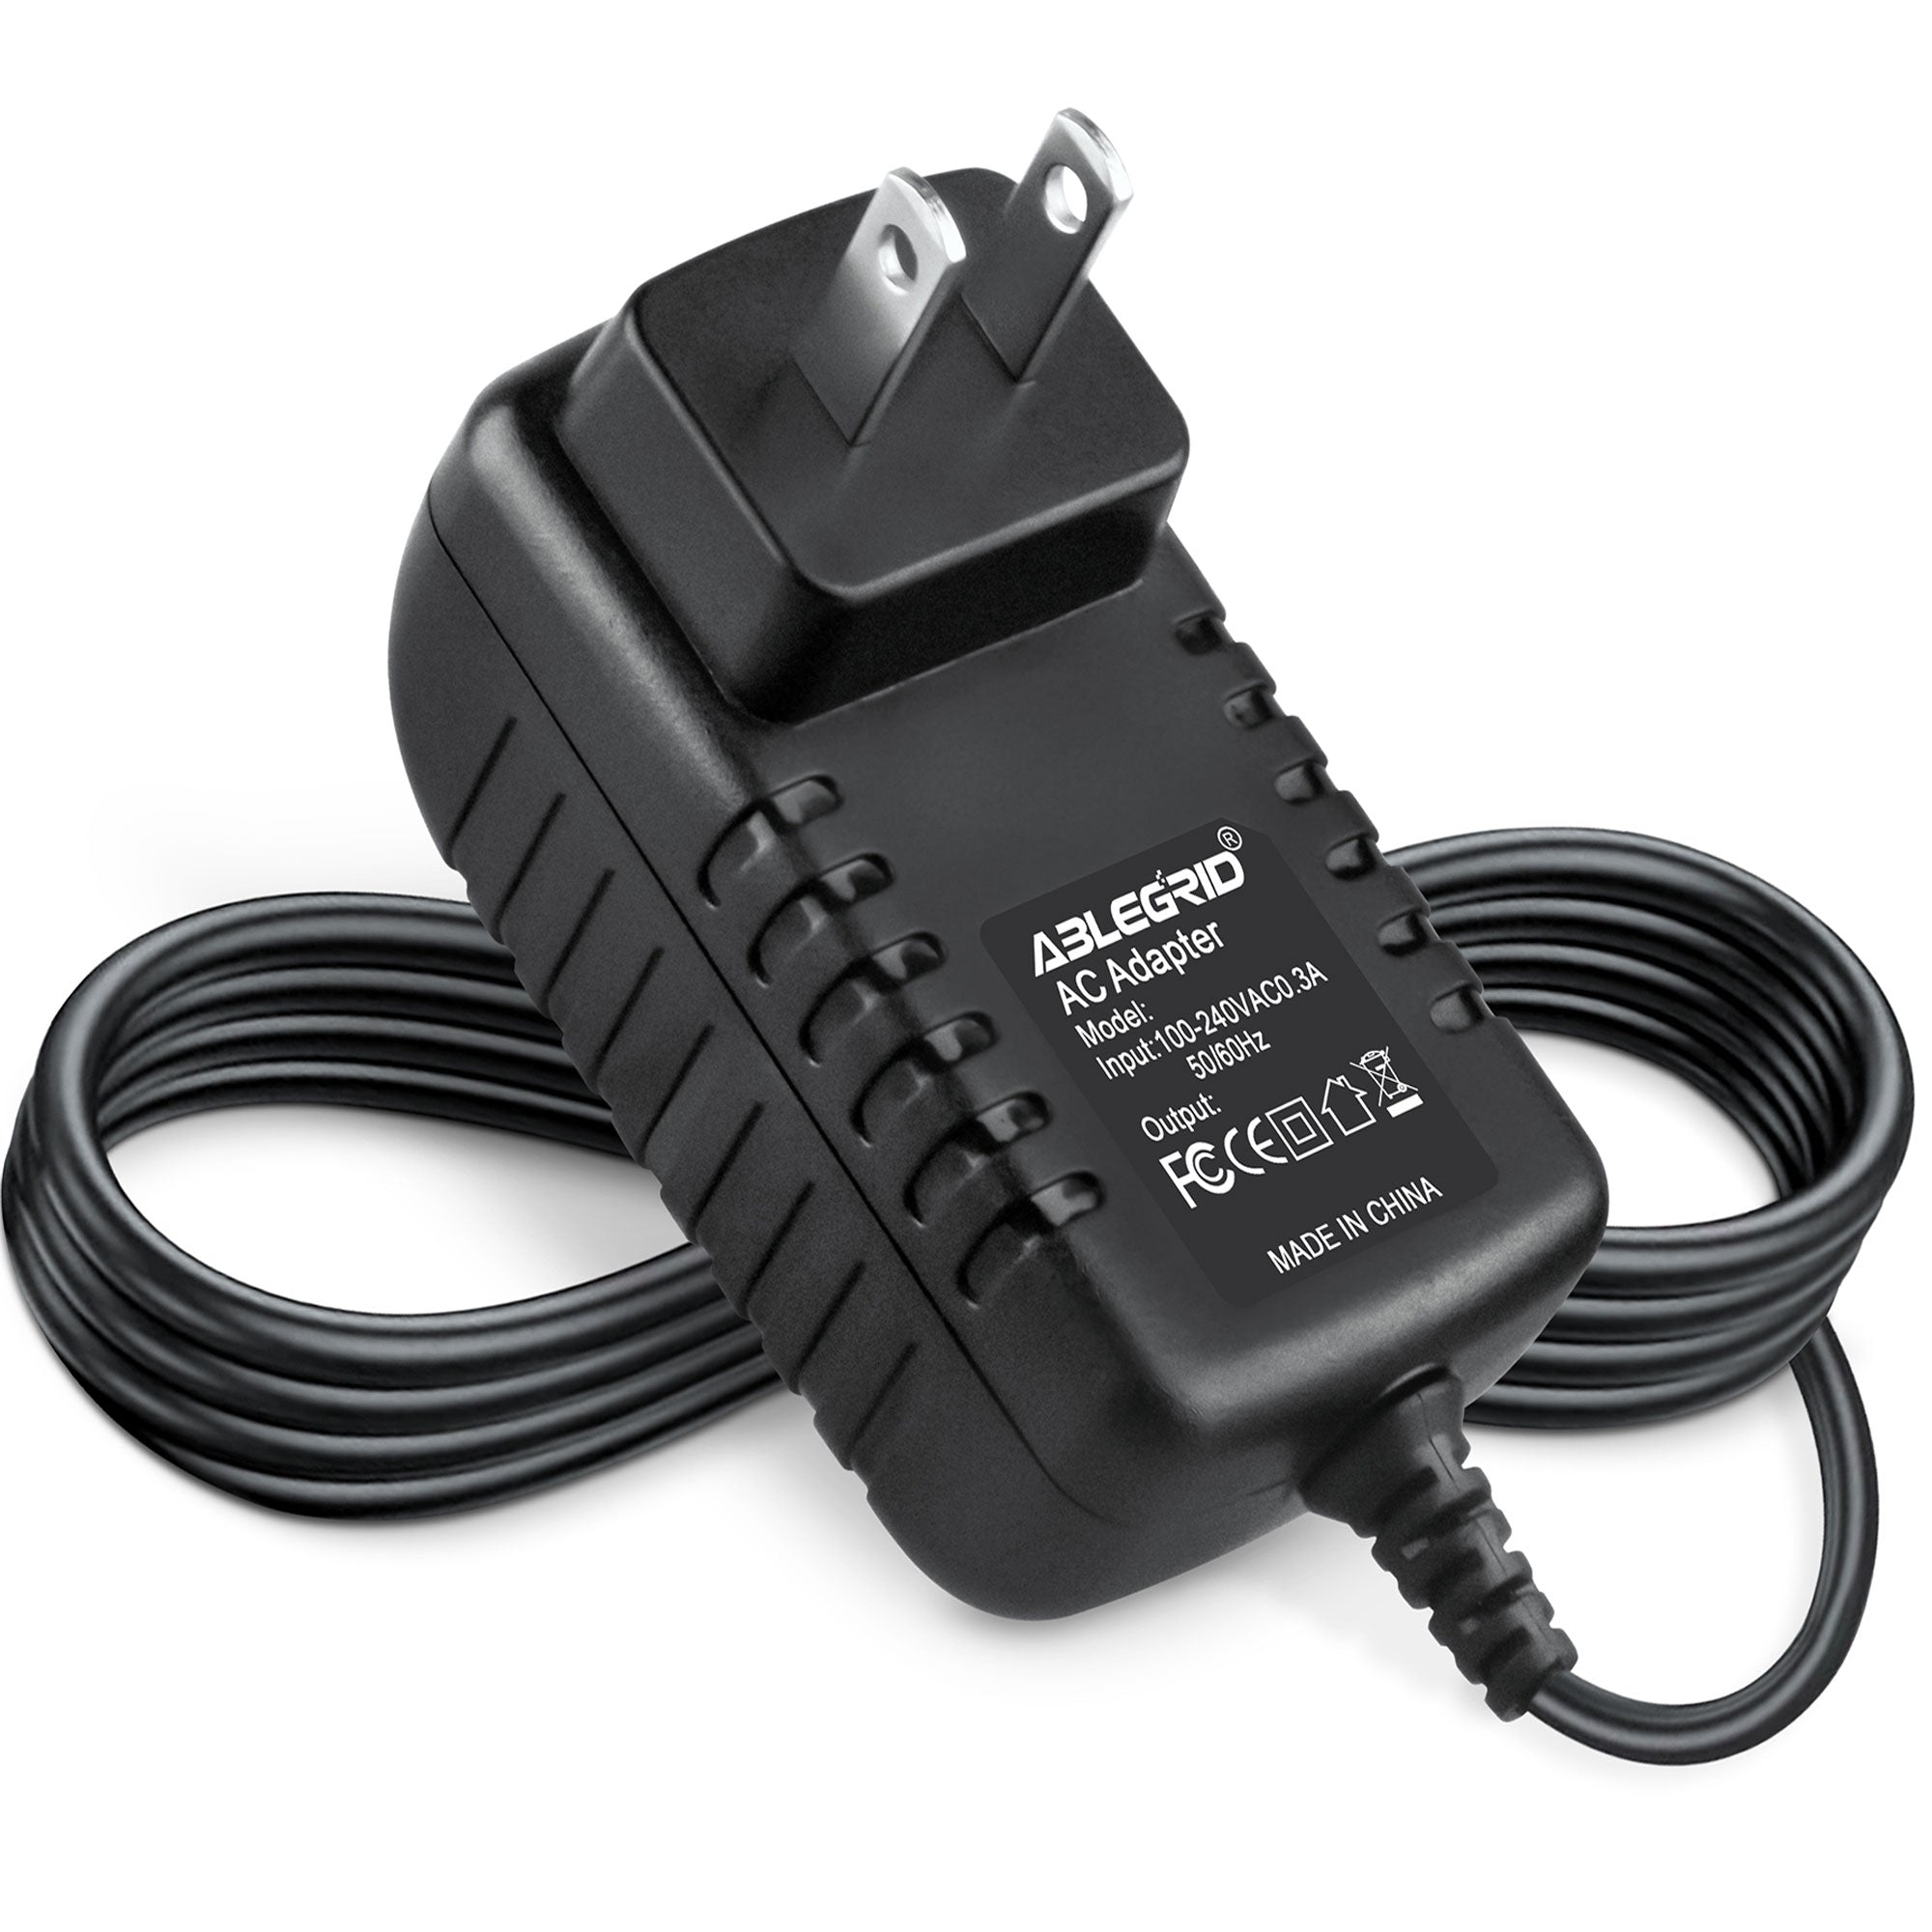 AbleGrid AC-DC Adapter for RAE Systems Model No. 41-12-500 D P/N: 500-0036-000 Plug in Class 2 Transformer Power Supply Cord Cable PS Wall Home Charger Input: 100V - 120V AC - 240 VAC 50/60Hz Worldwide Voltage Use Mains PSU